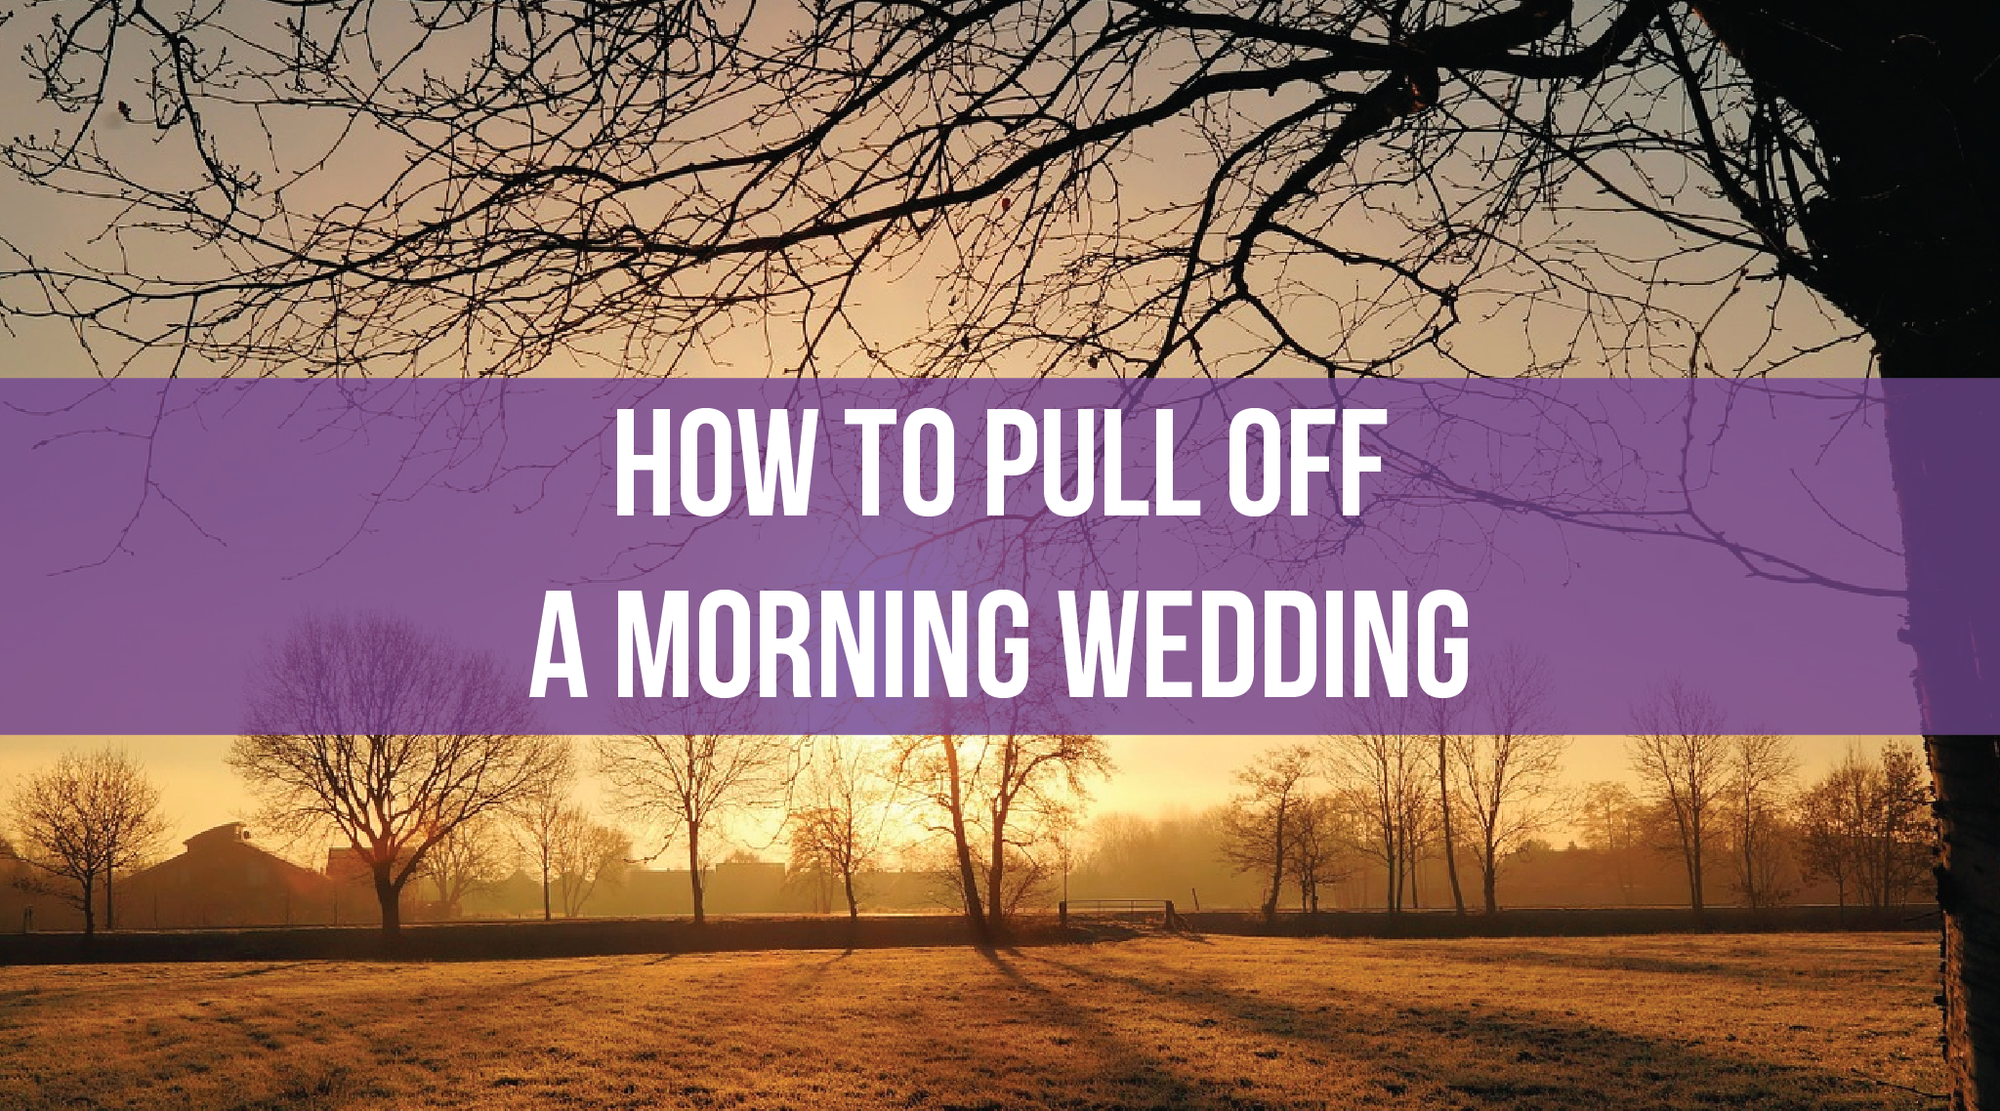 How to Pull Off a Morning Wedding